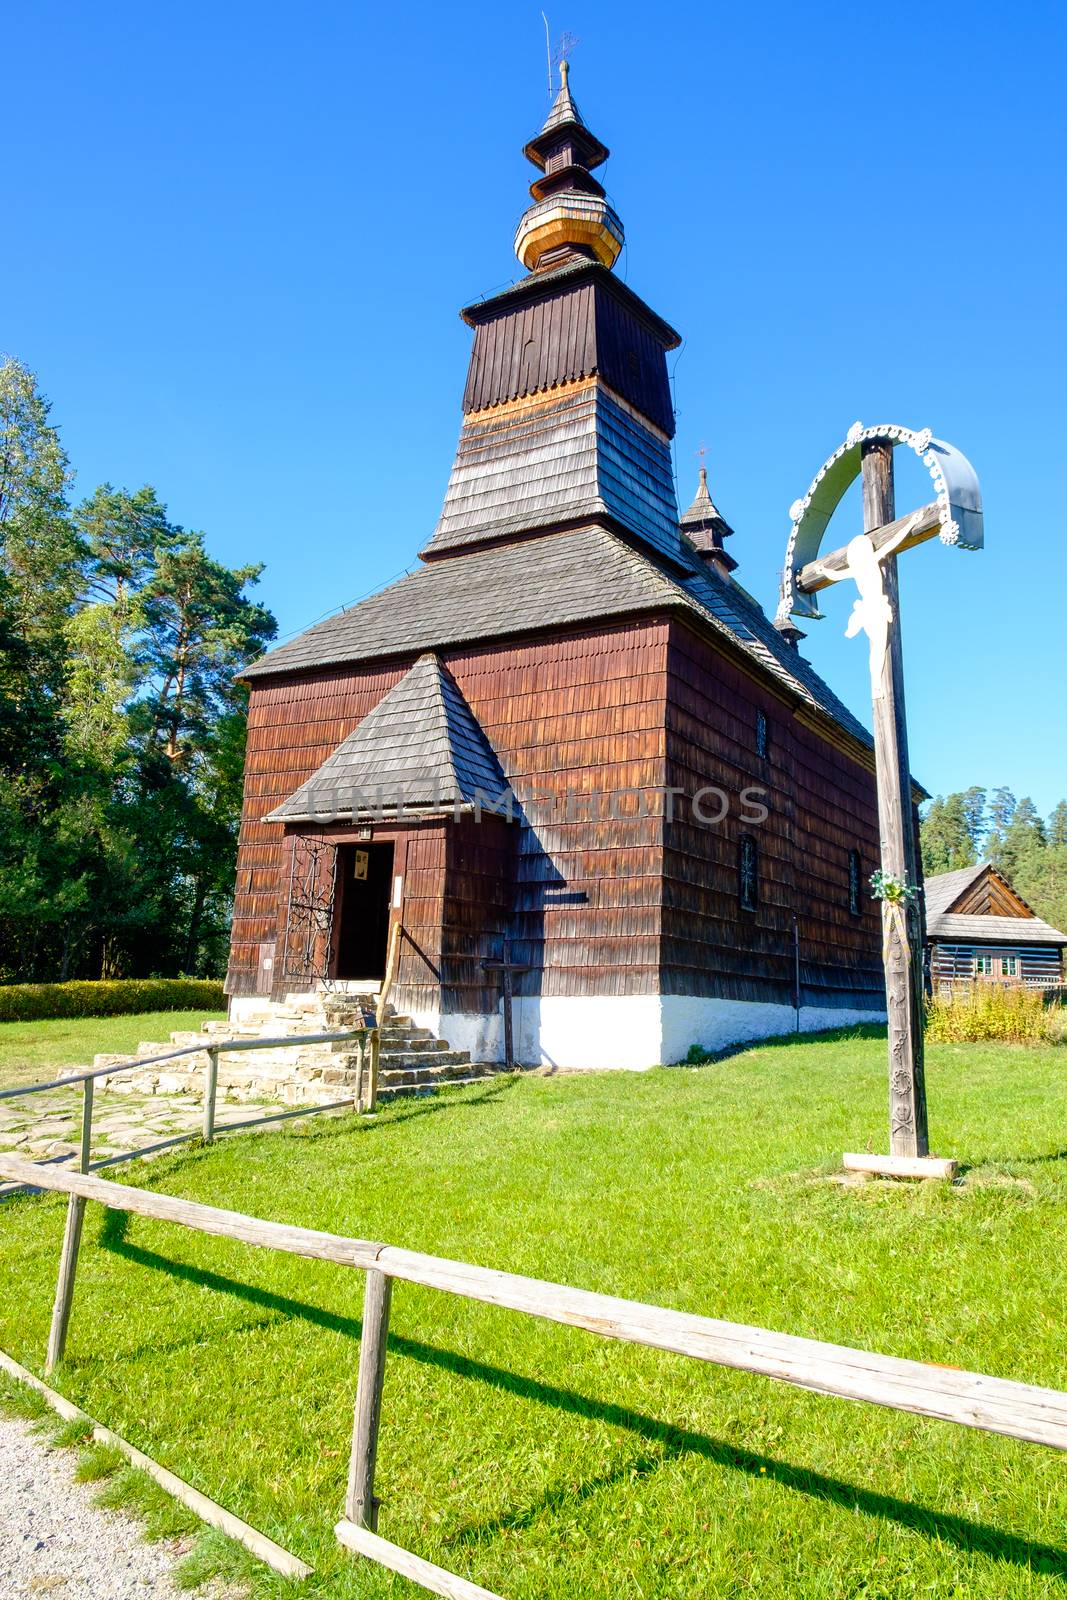 Old traditional Slovak wooden church in Stara Lubovna, Slovakia by martinm303